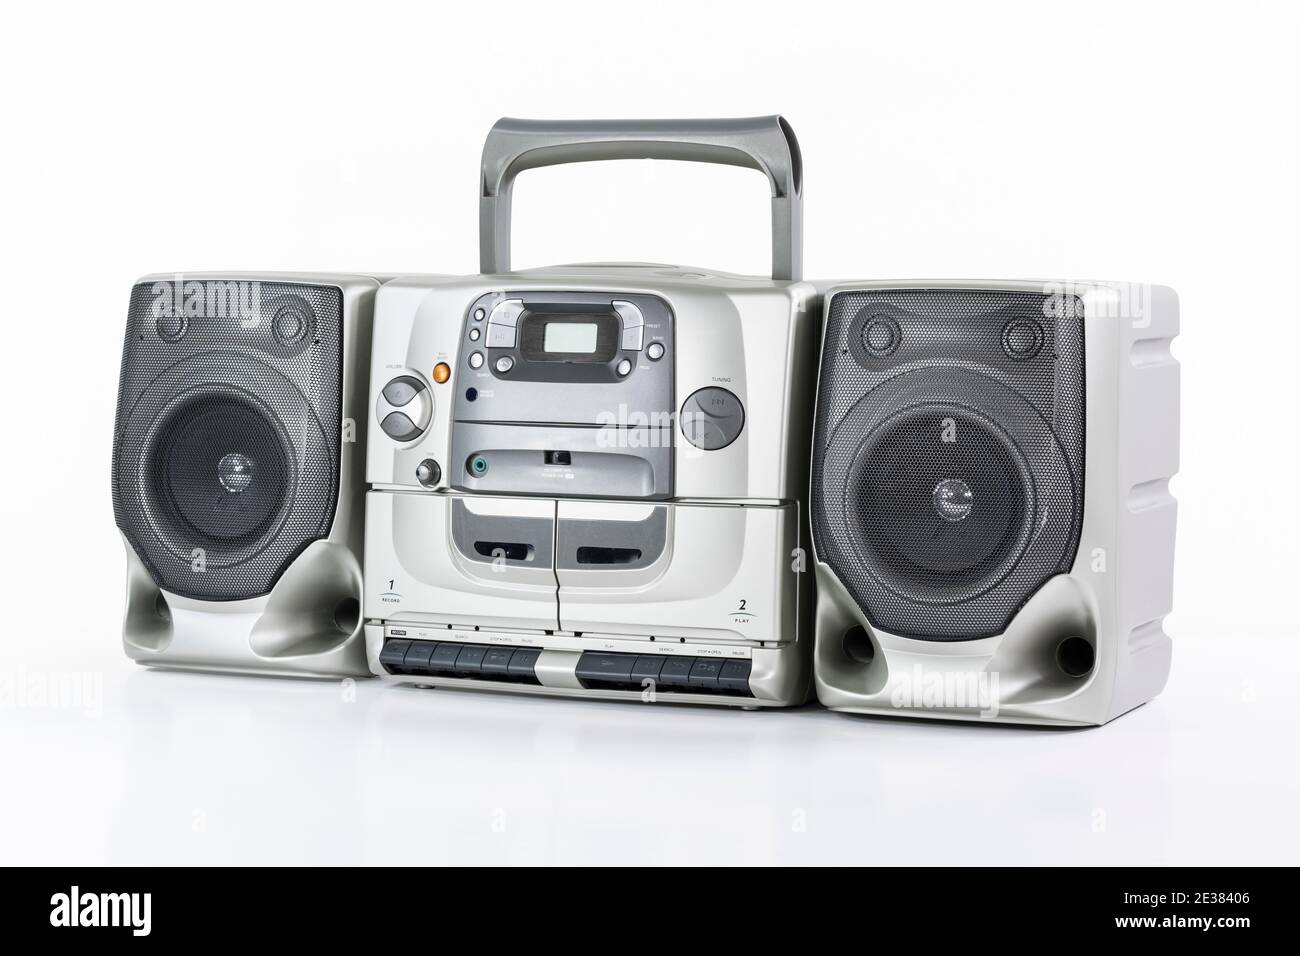 Vintage boom box style portable stereo radio, cd, cassette tape recorder on white. Stock Photo